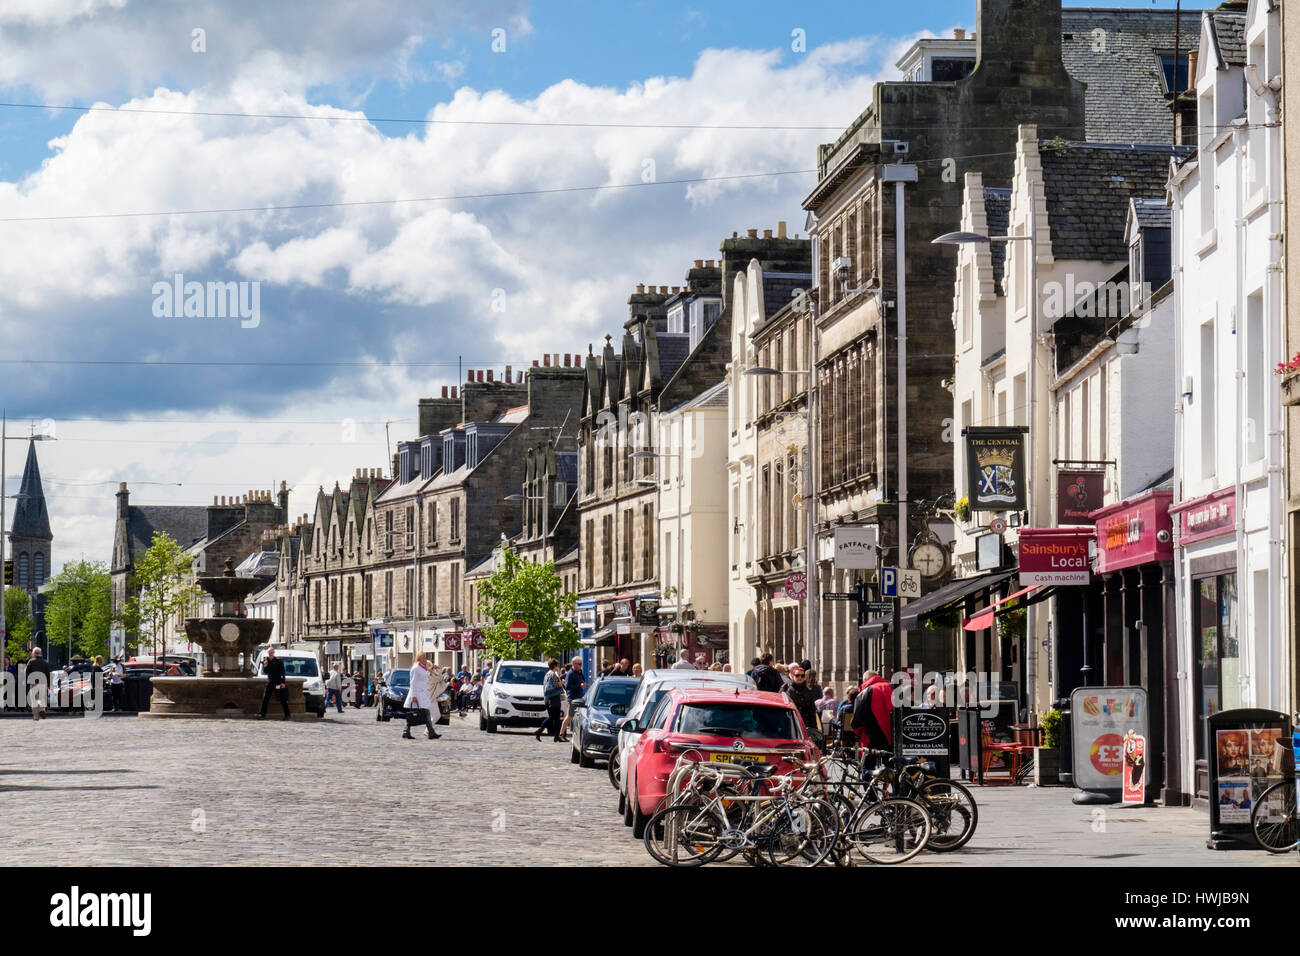 Street scene with cars parked on road outside small shops in town centre. Market Street, Royal Burgh St Andrews, Fife, Scotland, UK, Britain Stock Photo